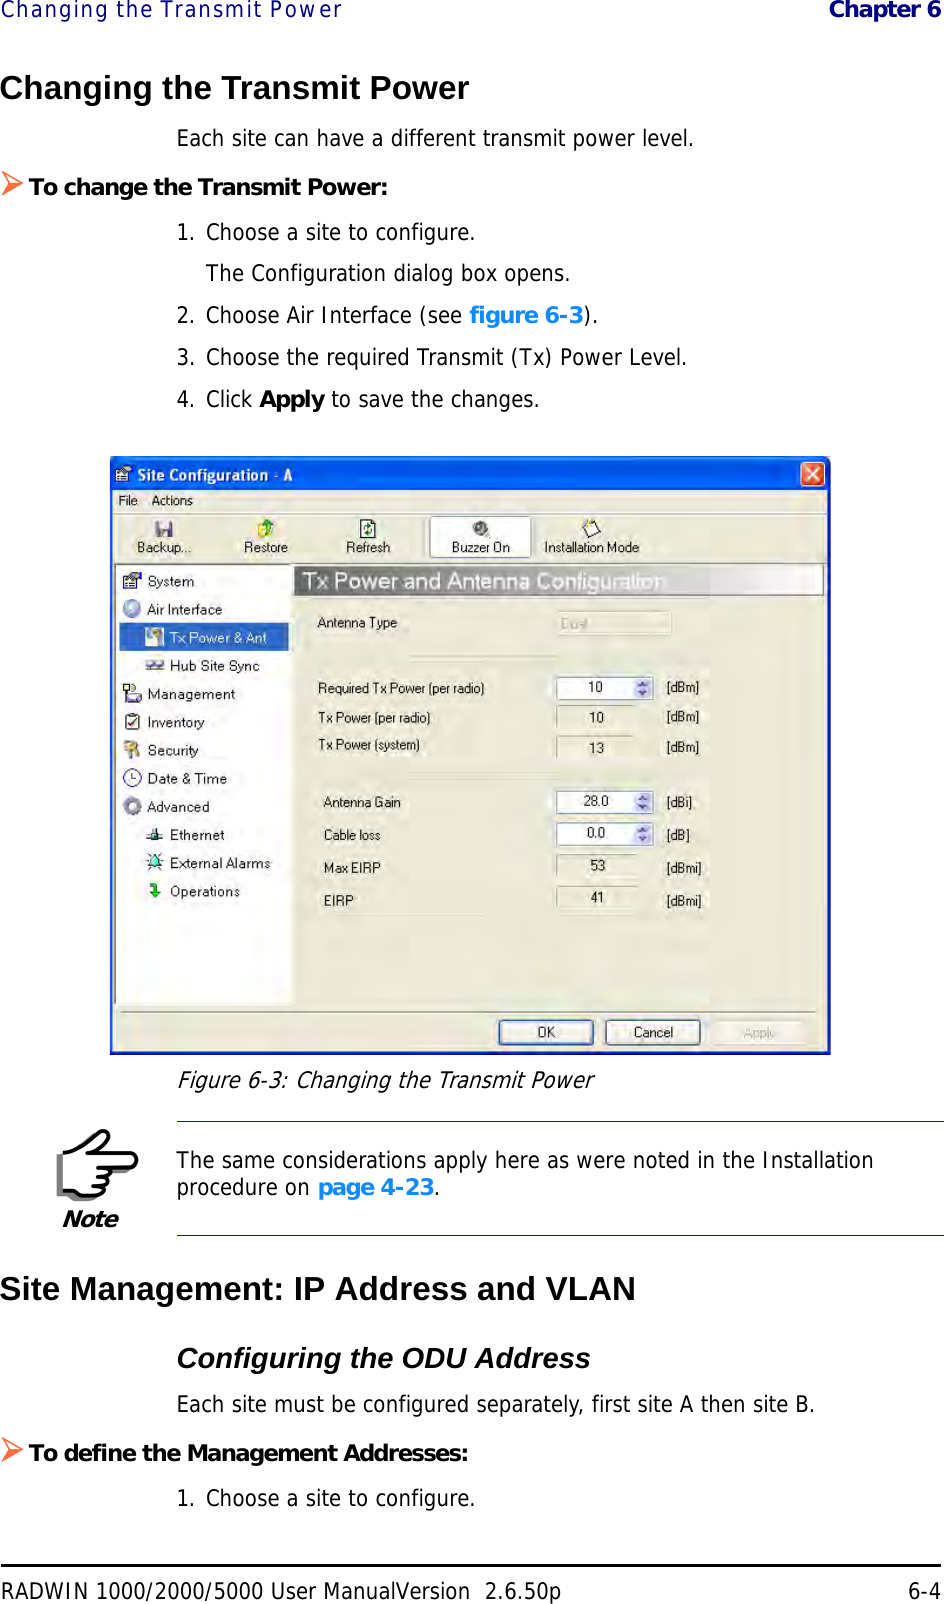 Changing the Transmit Power  Chapter 6RADWIN 1000/2000/5000 User ManualVersion  2.6.50p 6-4Changing the Transmit PowerEach site can have a different transmit power level. To change the Transmit Power:1. Choose a site to configure.The Configuration dialog box opens.2. Choose Air Interface (see figure 6-3).3. Choose the required Transmit (Tx) Power Level.4. Click Apply to save the changes.Figure 6-3: Changing the Transmit PowerSite Management: IP Address and VLANConfiguring the ODU AddressEach site must be configured separately, first site A then site B.To define the Management Addresses:1. Choose a site to configure.NoteThe same considerations apply here as were noted in the Installation procedure on page 4-23.